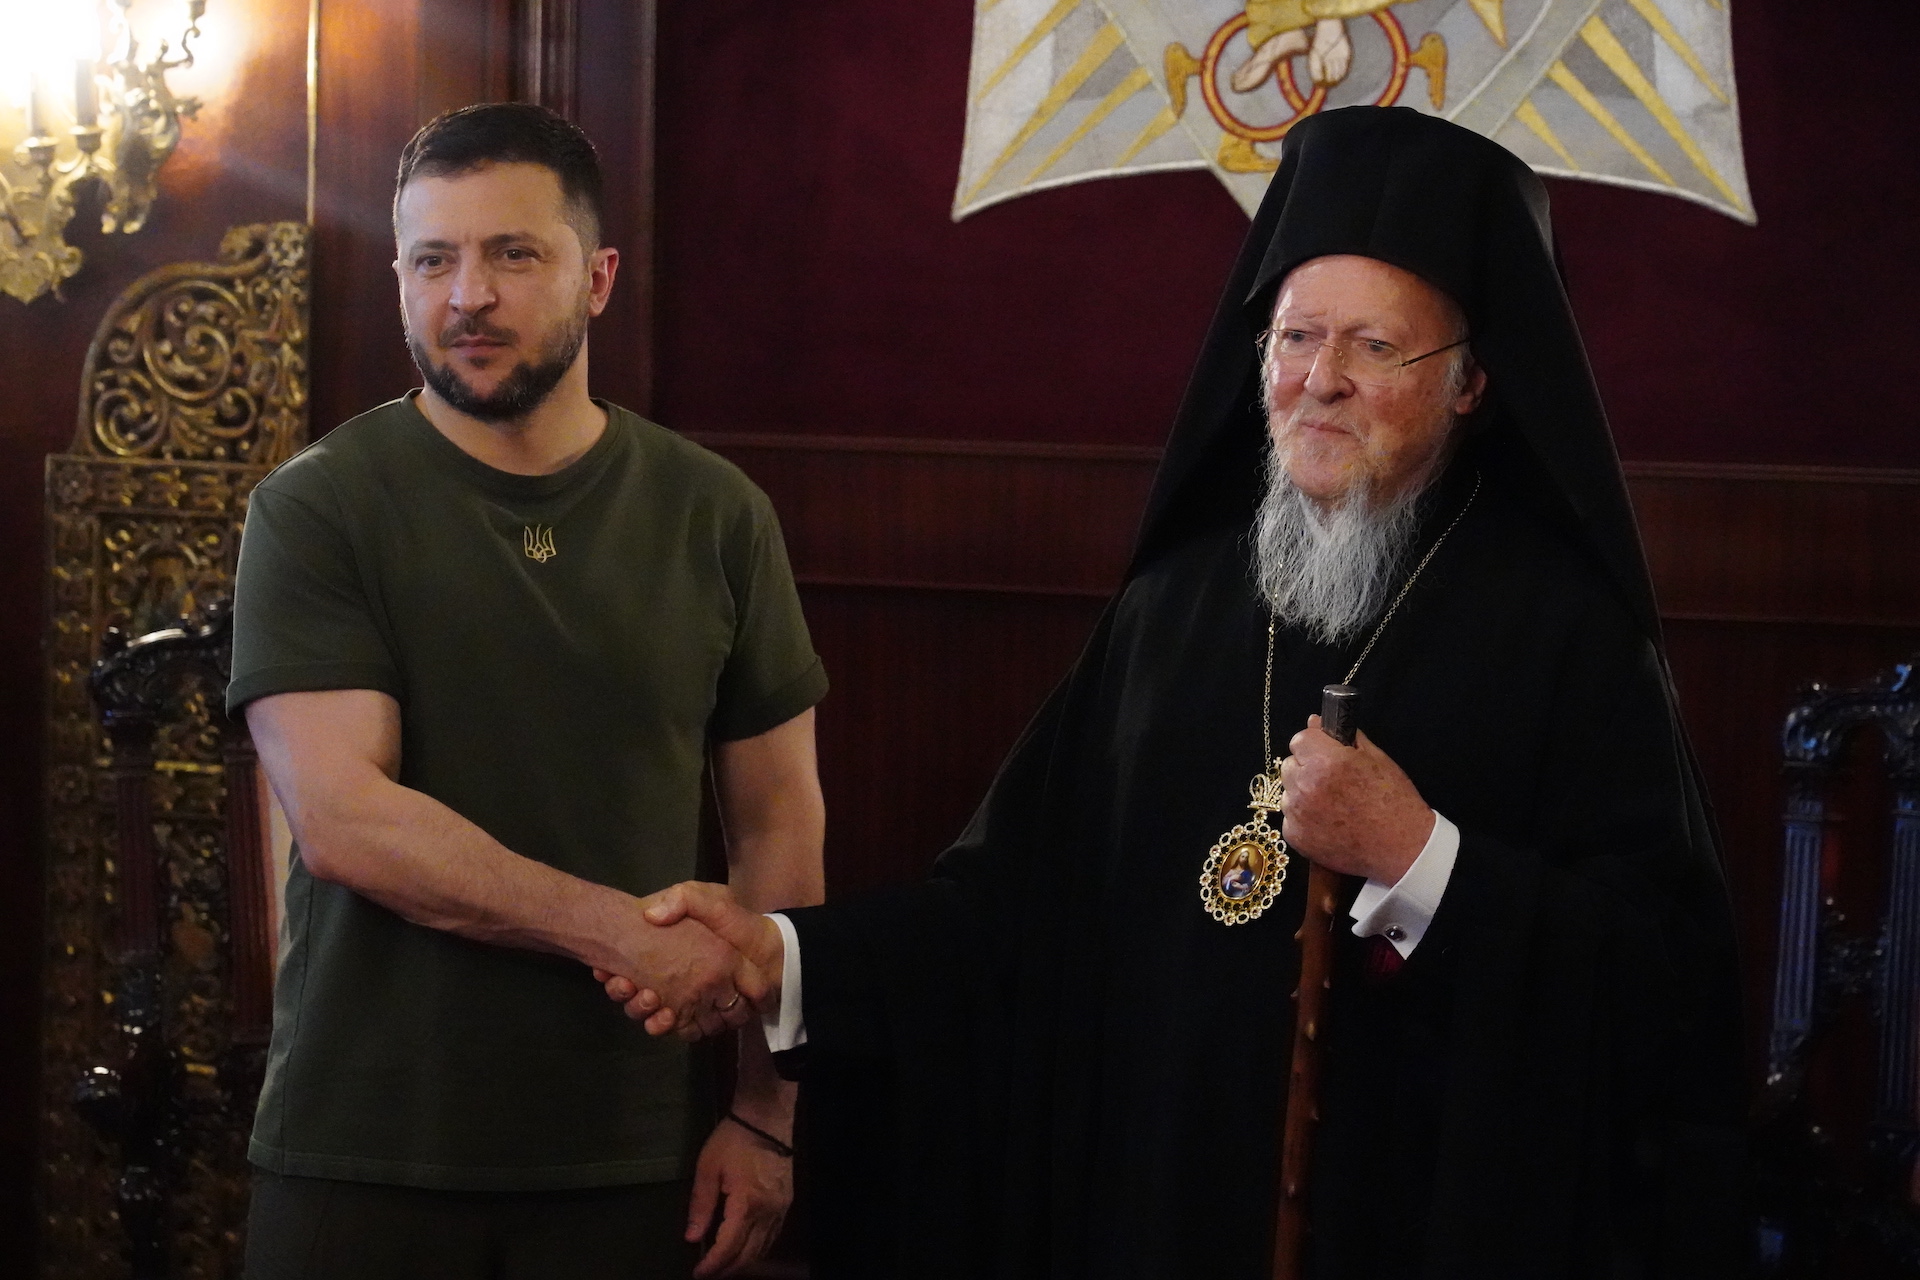 “The Ecumenical Patriarchate as the Mother Church of All Orthodox in Ukraine is Always on Their Side”: Ecumenical Patriarch Bartholomew I of Constantinople